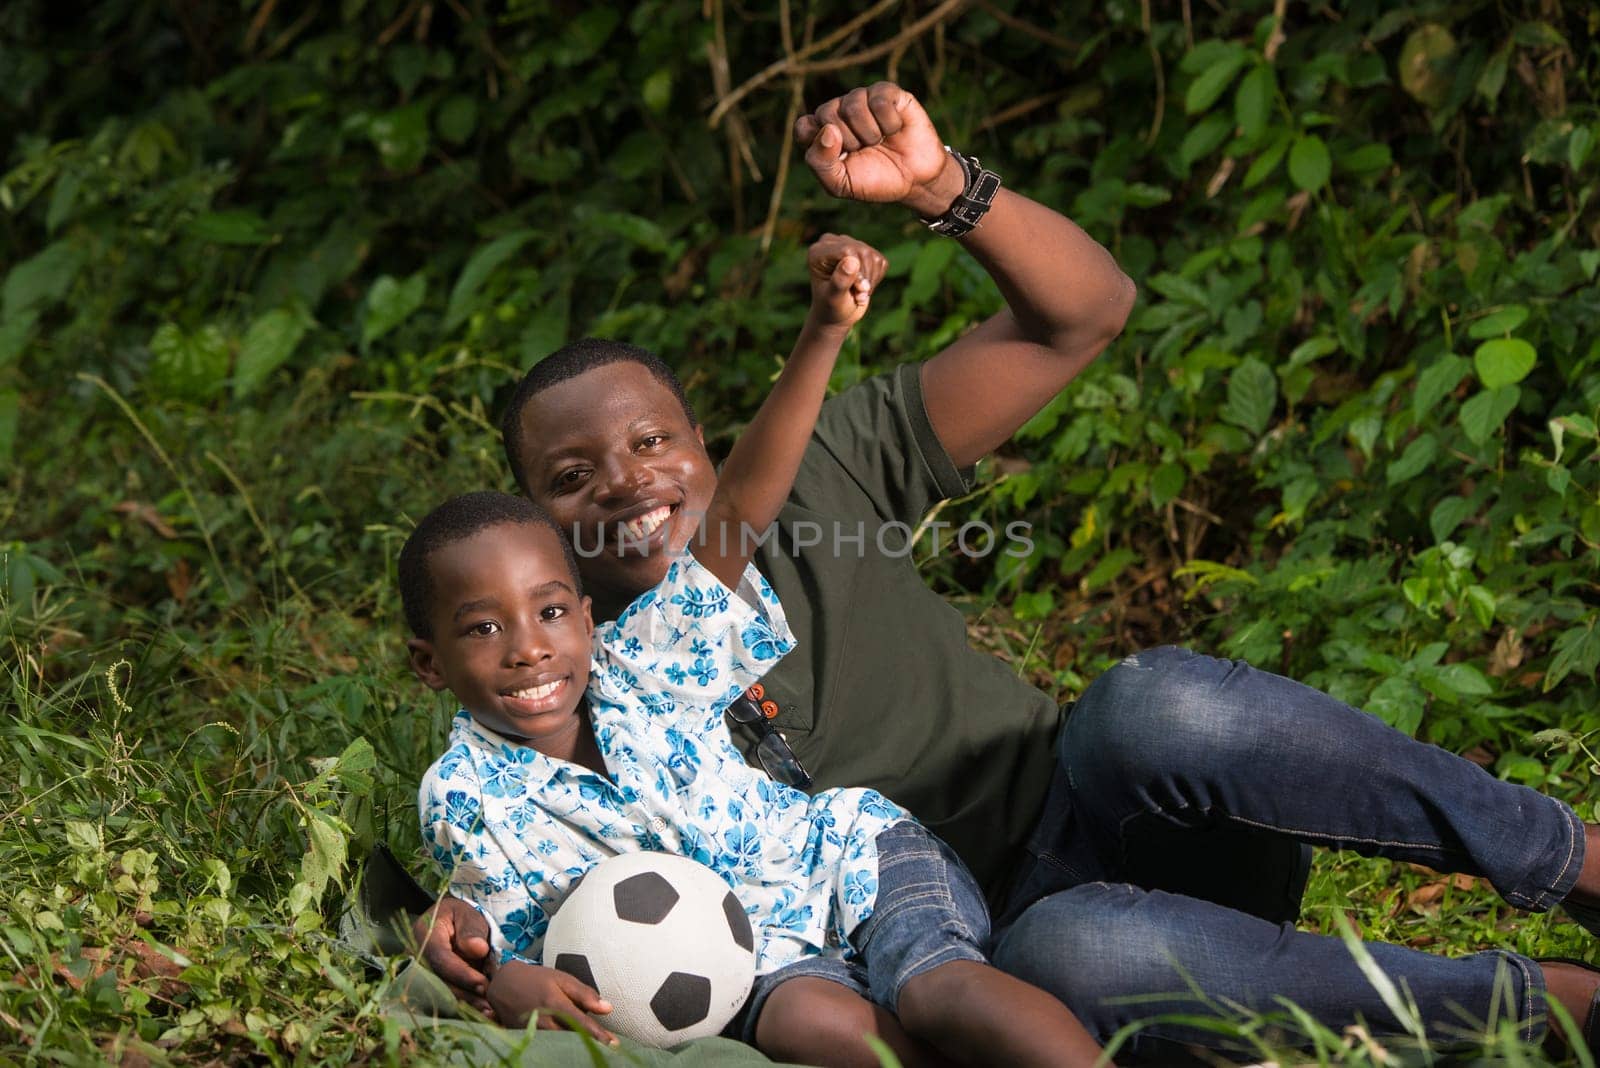 young man lying in a park with his son clenched fists and look at the camera smiling.